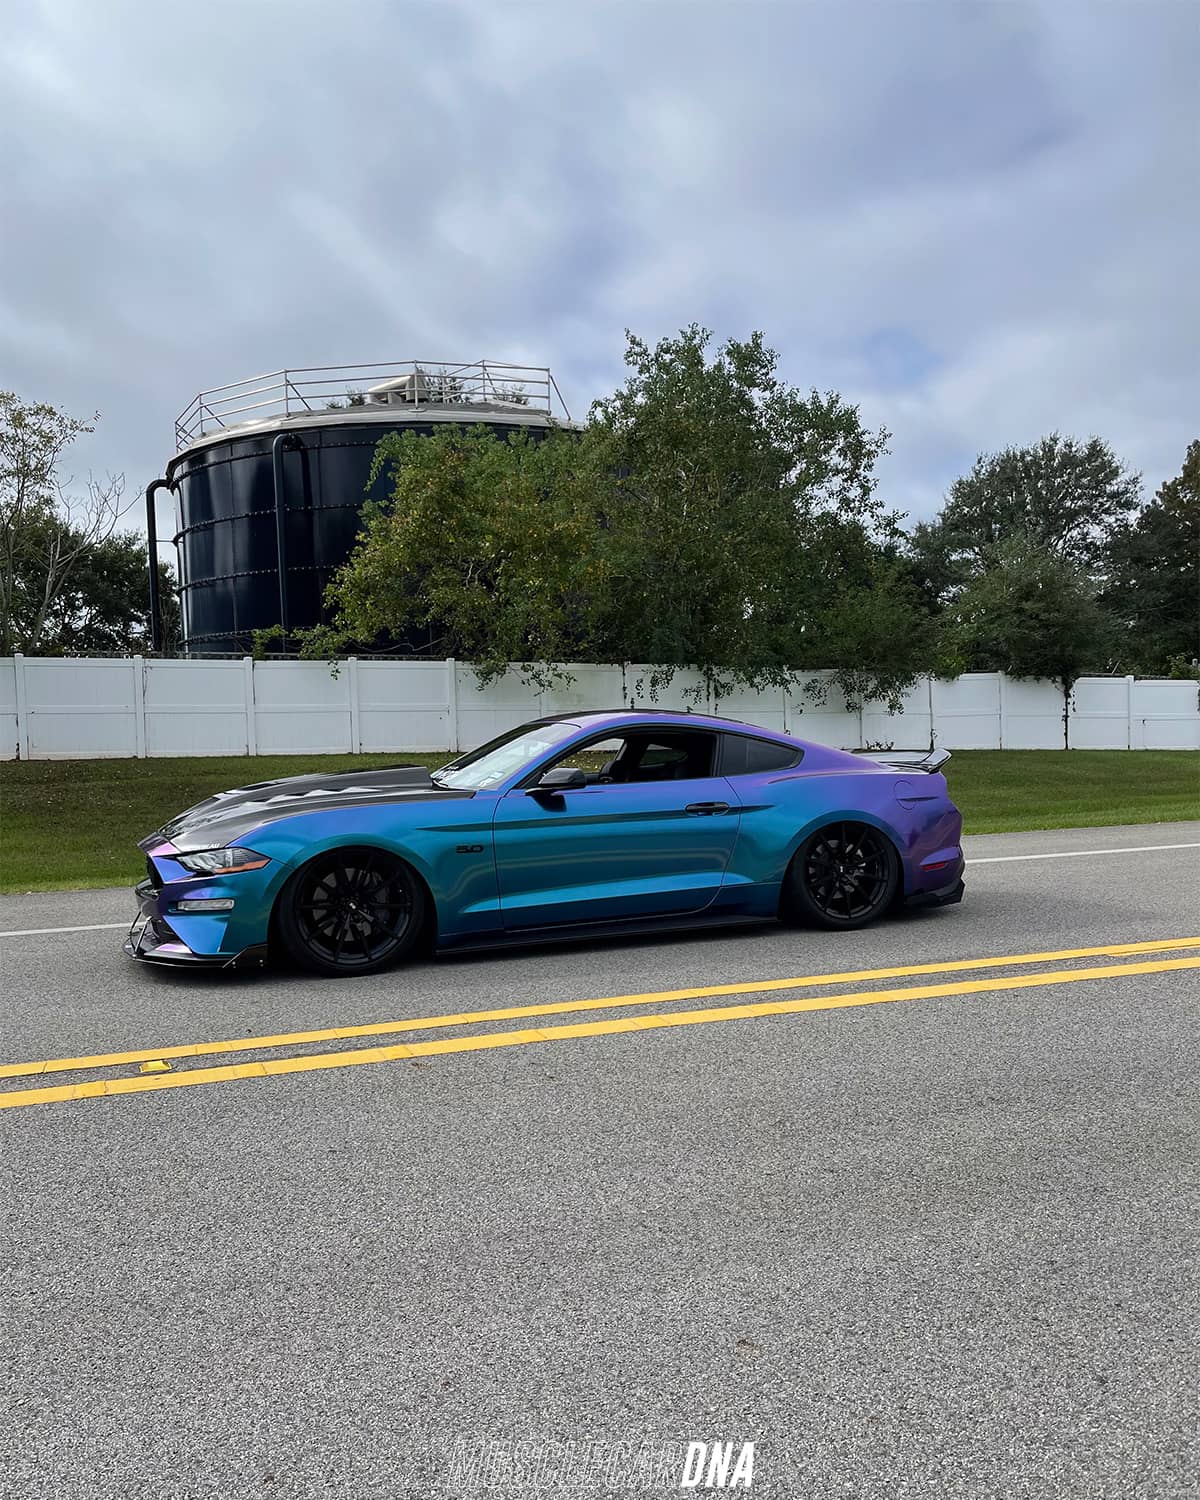 Bagged Ford Mustang GT S550 exterior mods